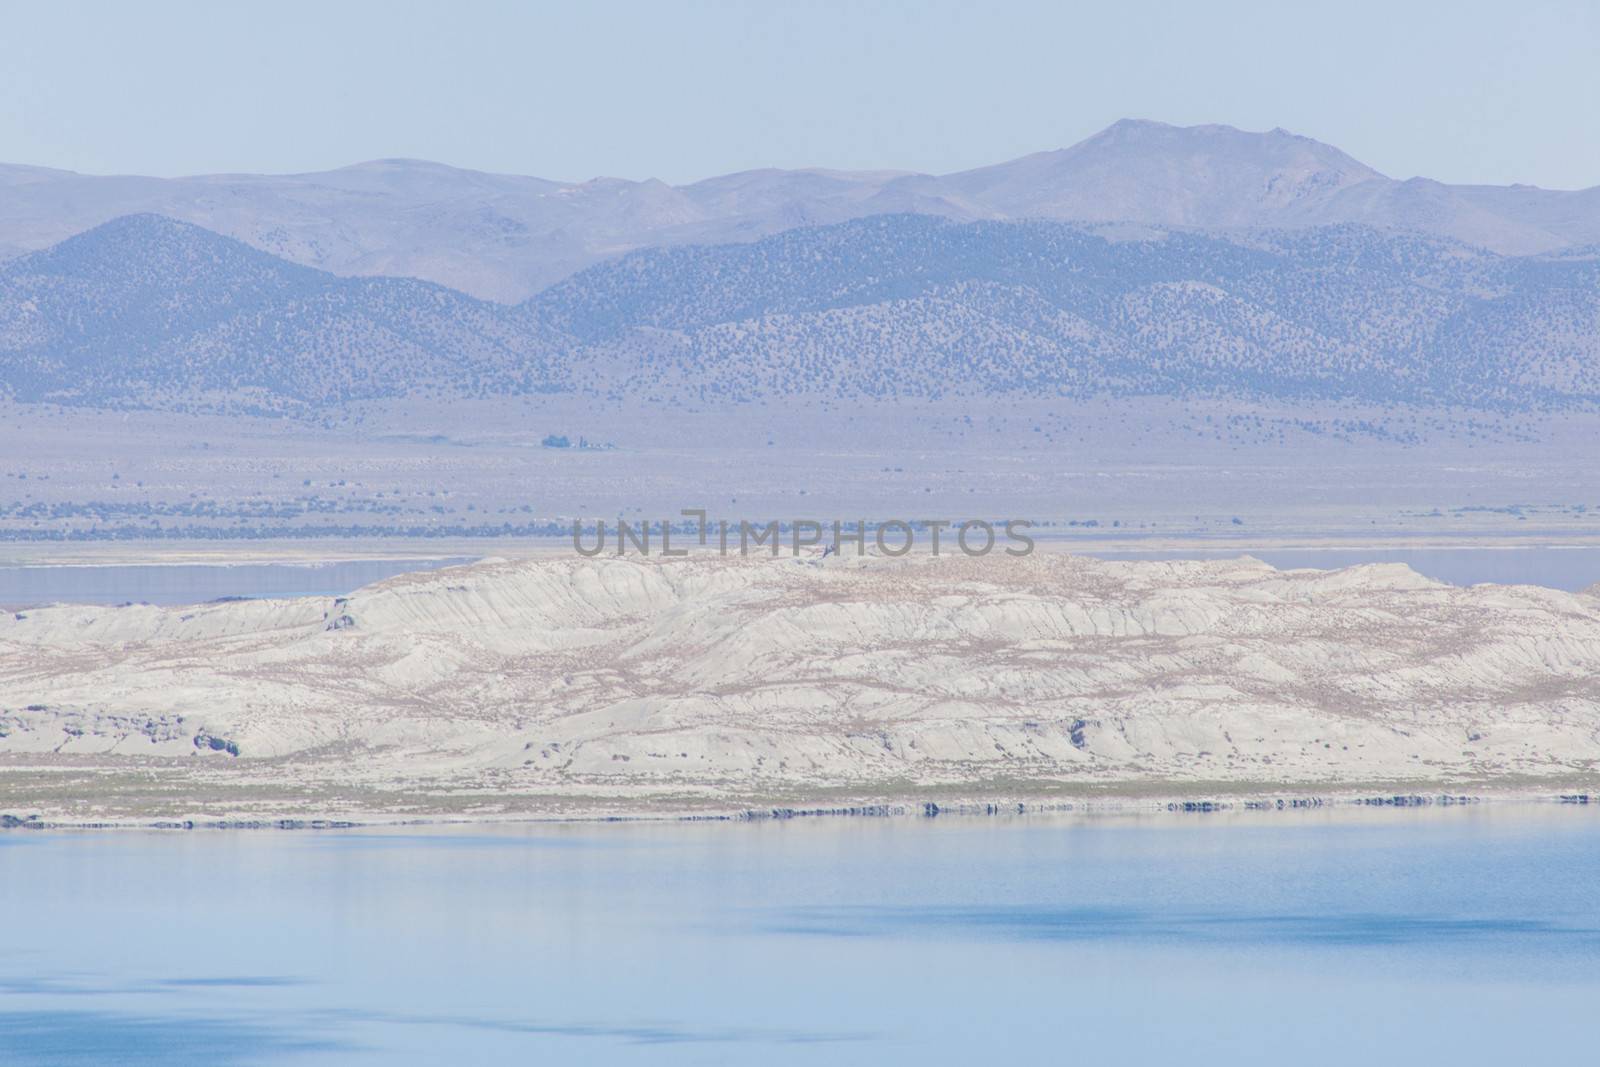 Mono Lake is a large, shallow saline lake in Mono County, California, The lack of an outlet causes high levels of salts to accumulate in the lake.